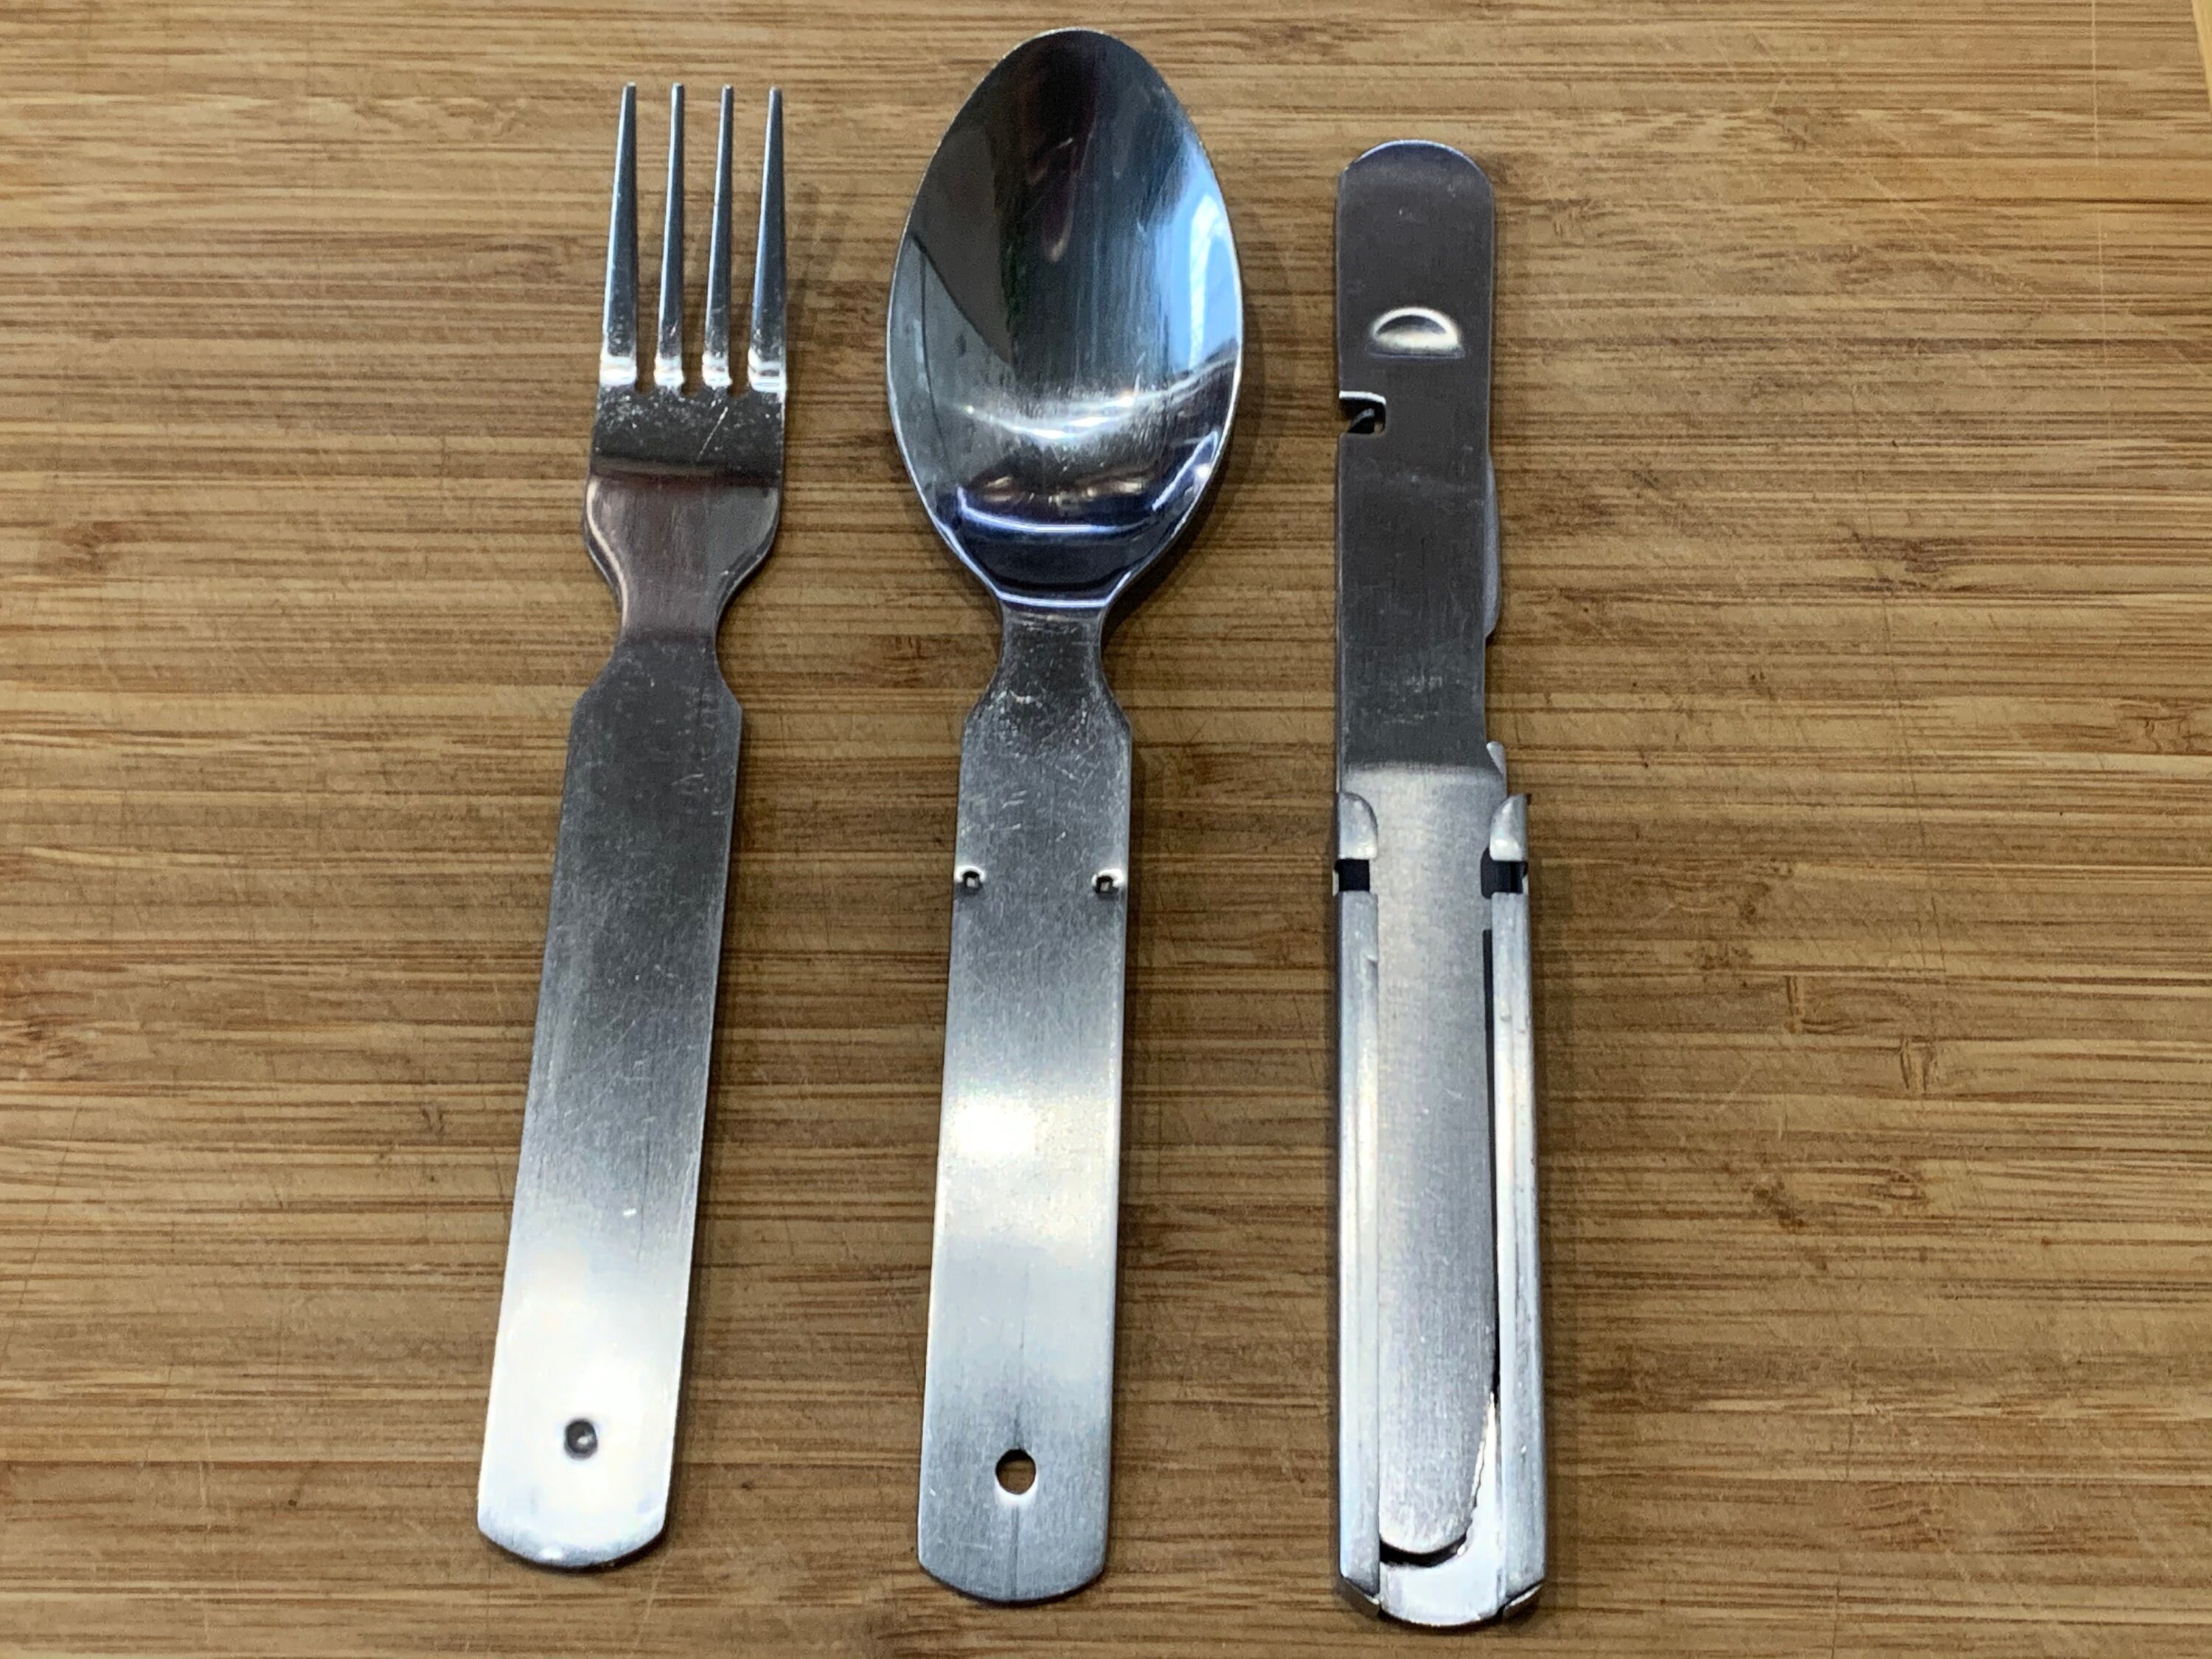 Original Hungarian army cutlery set 4 pieces. Eating utensils military  issue spoon fork knife kit flatware multi-tool Camping bottle can opener  stainless steel NEW